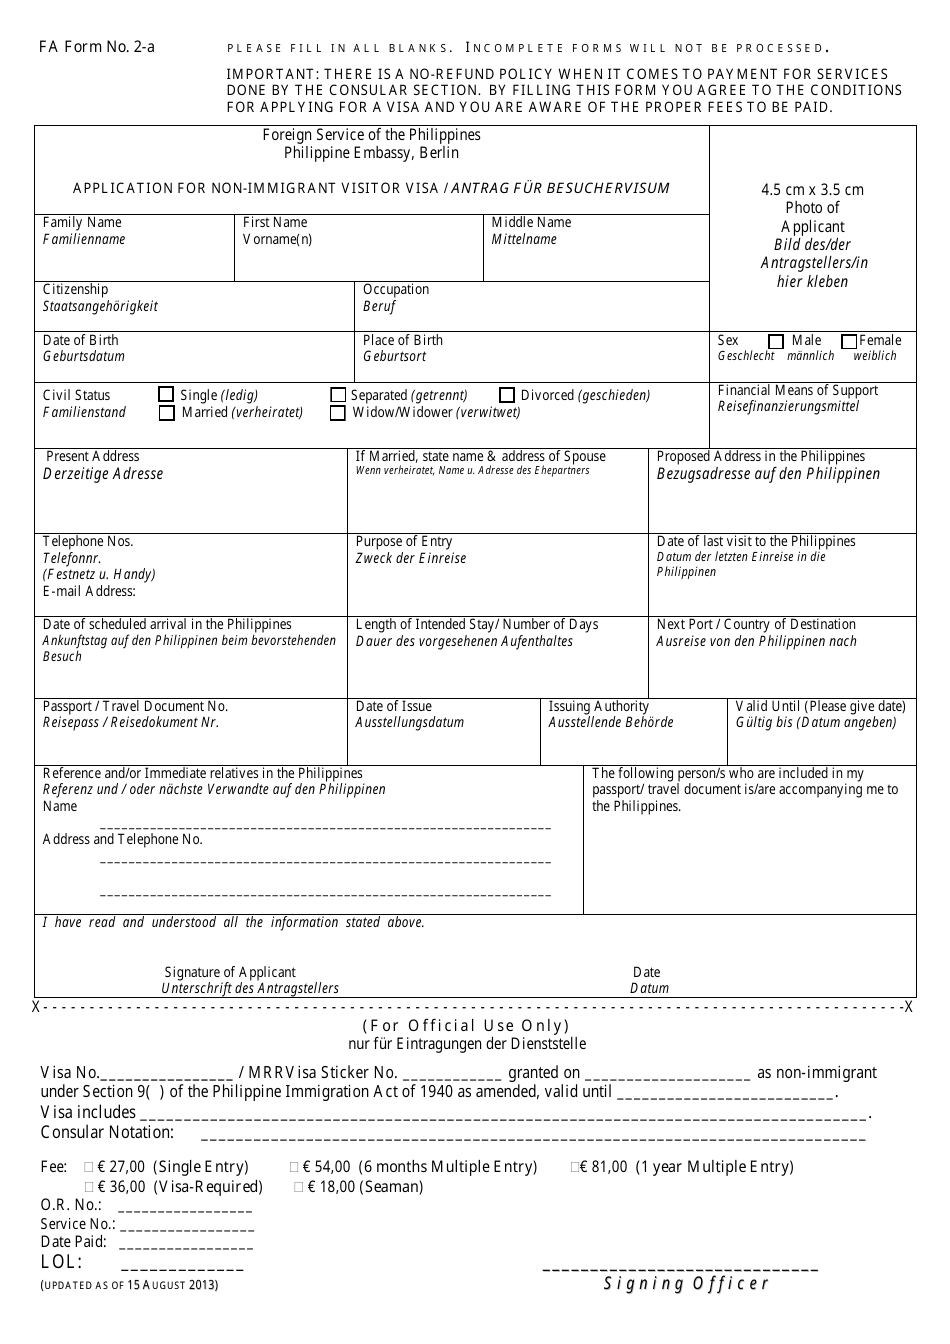 FA Form 2-A Philippine Non-immigrant Visitor Visa Application Form - Philippine Embassy - Berlin, Germany (English / German), Page 1